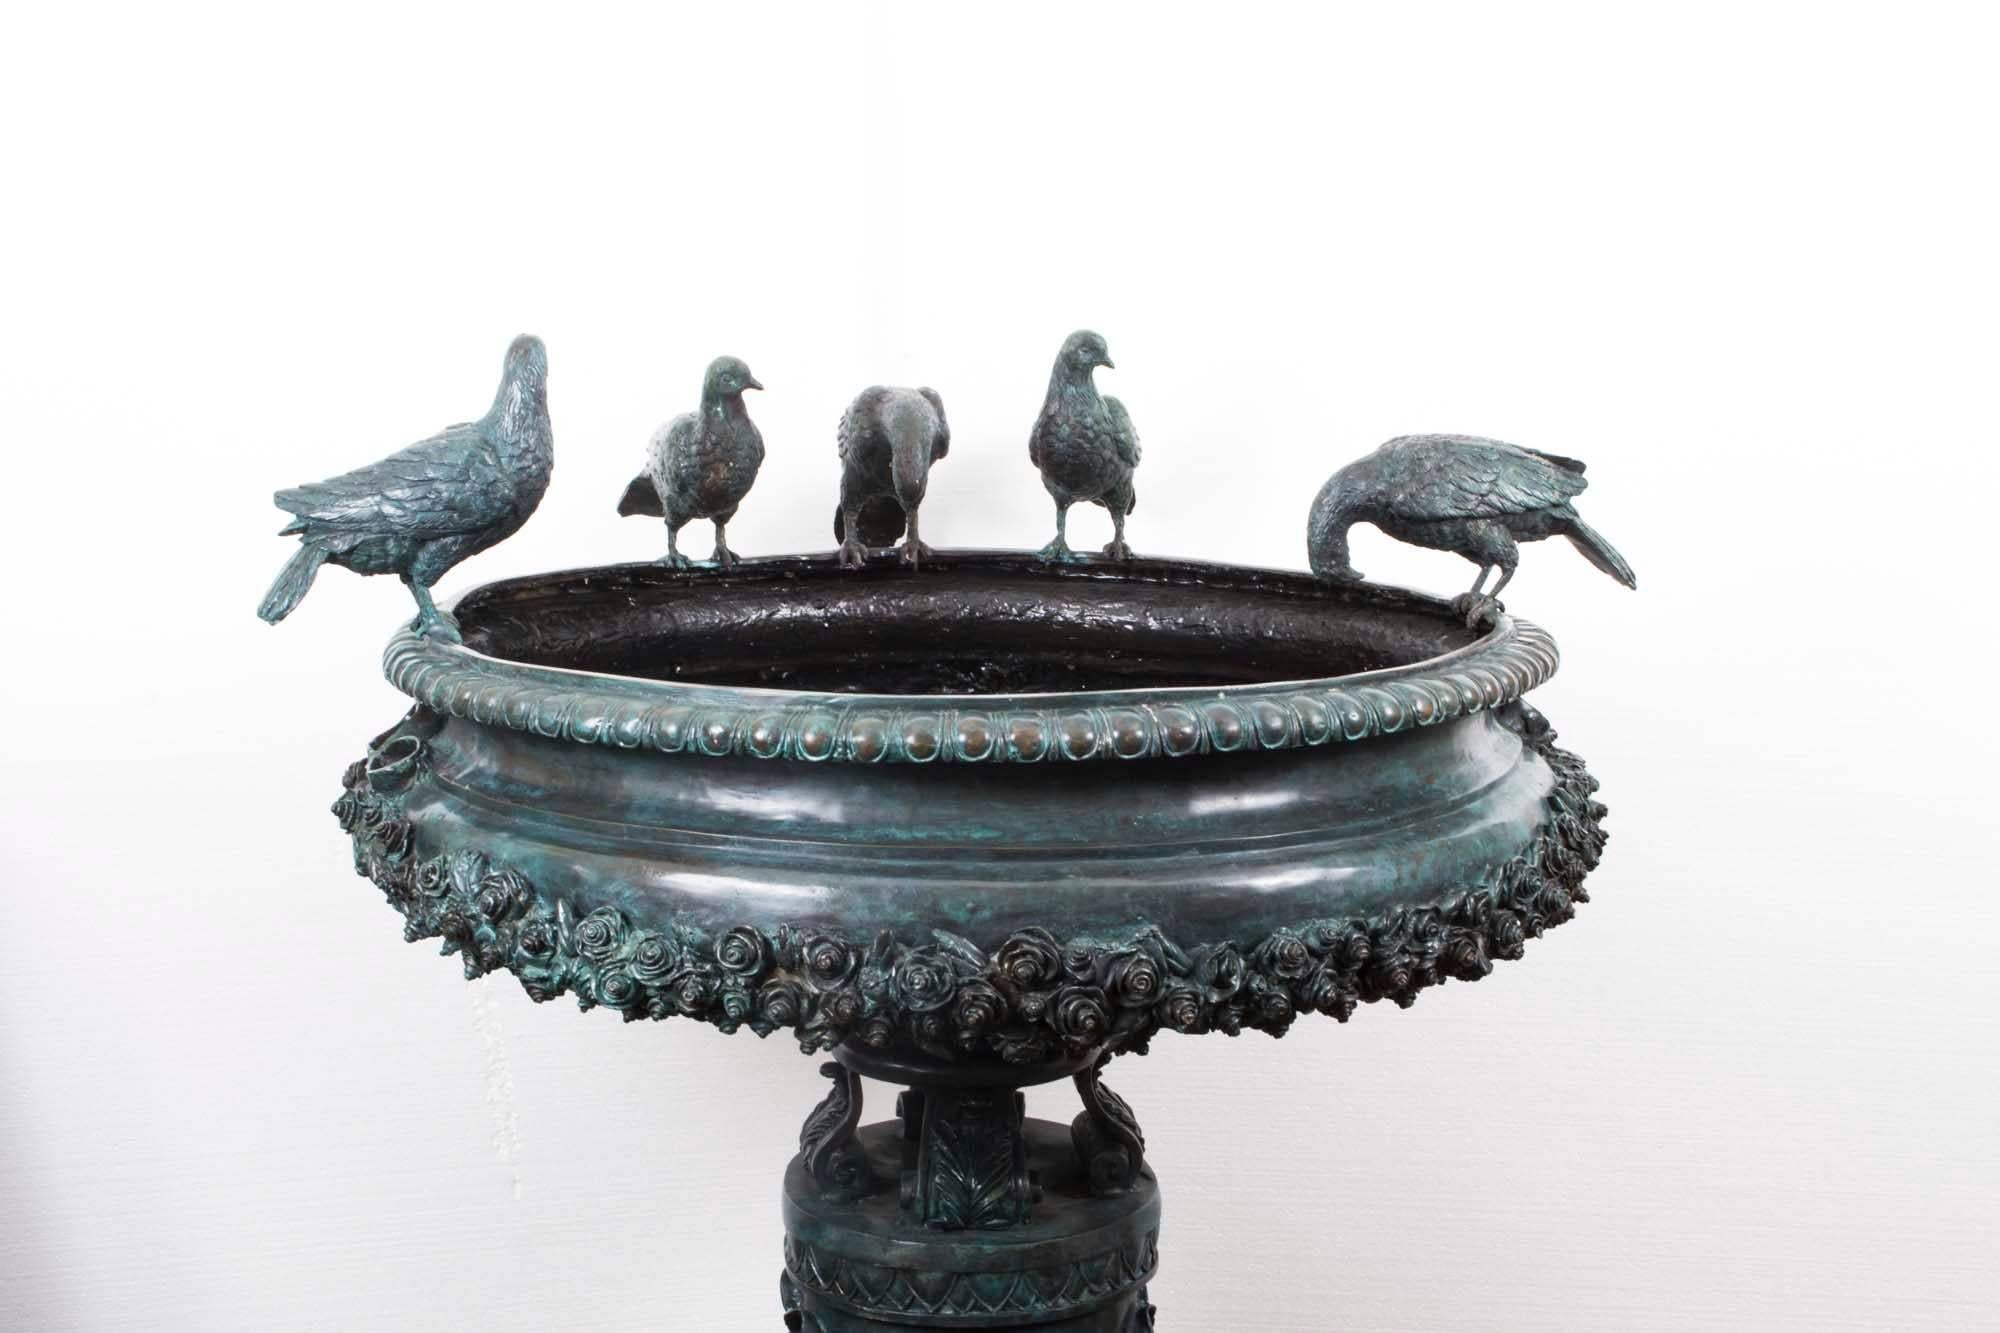 This is a stunning large fountain bird bath that is sculpted in solid bronze in the classical Greek style, and dates from the late 20th century.

The fountain features a large urn with exquisite decoration on a cylindrical plinth decorated with